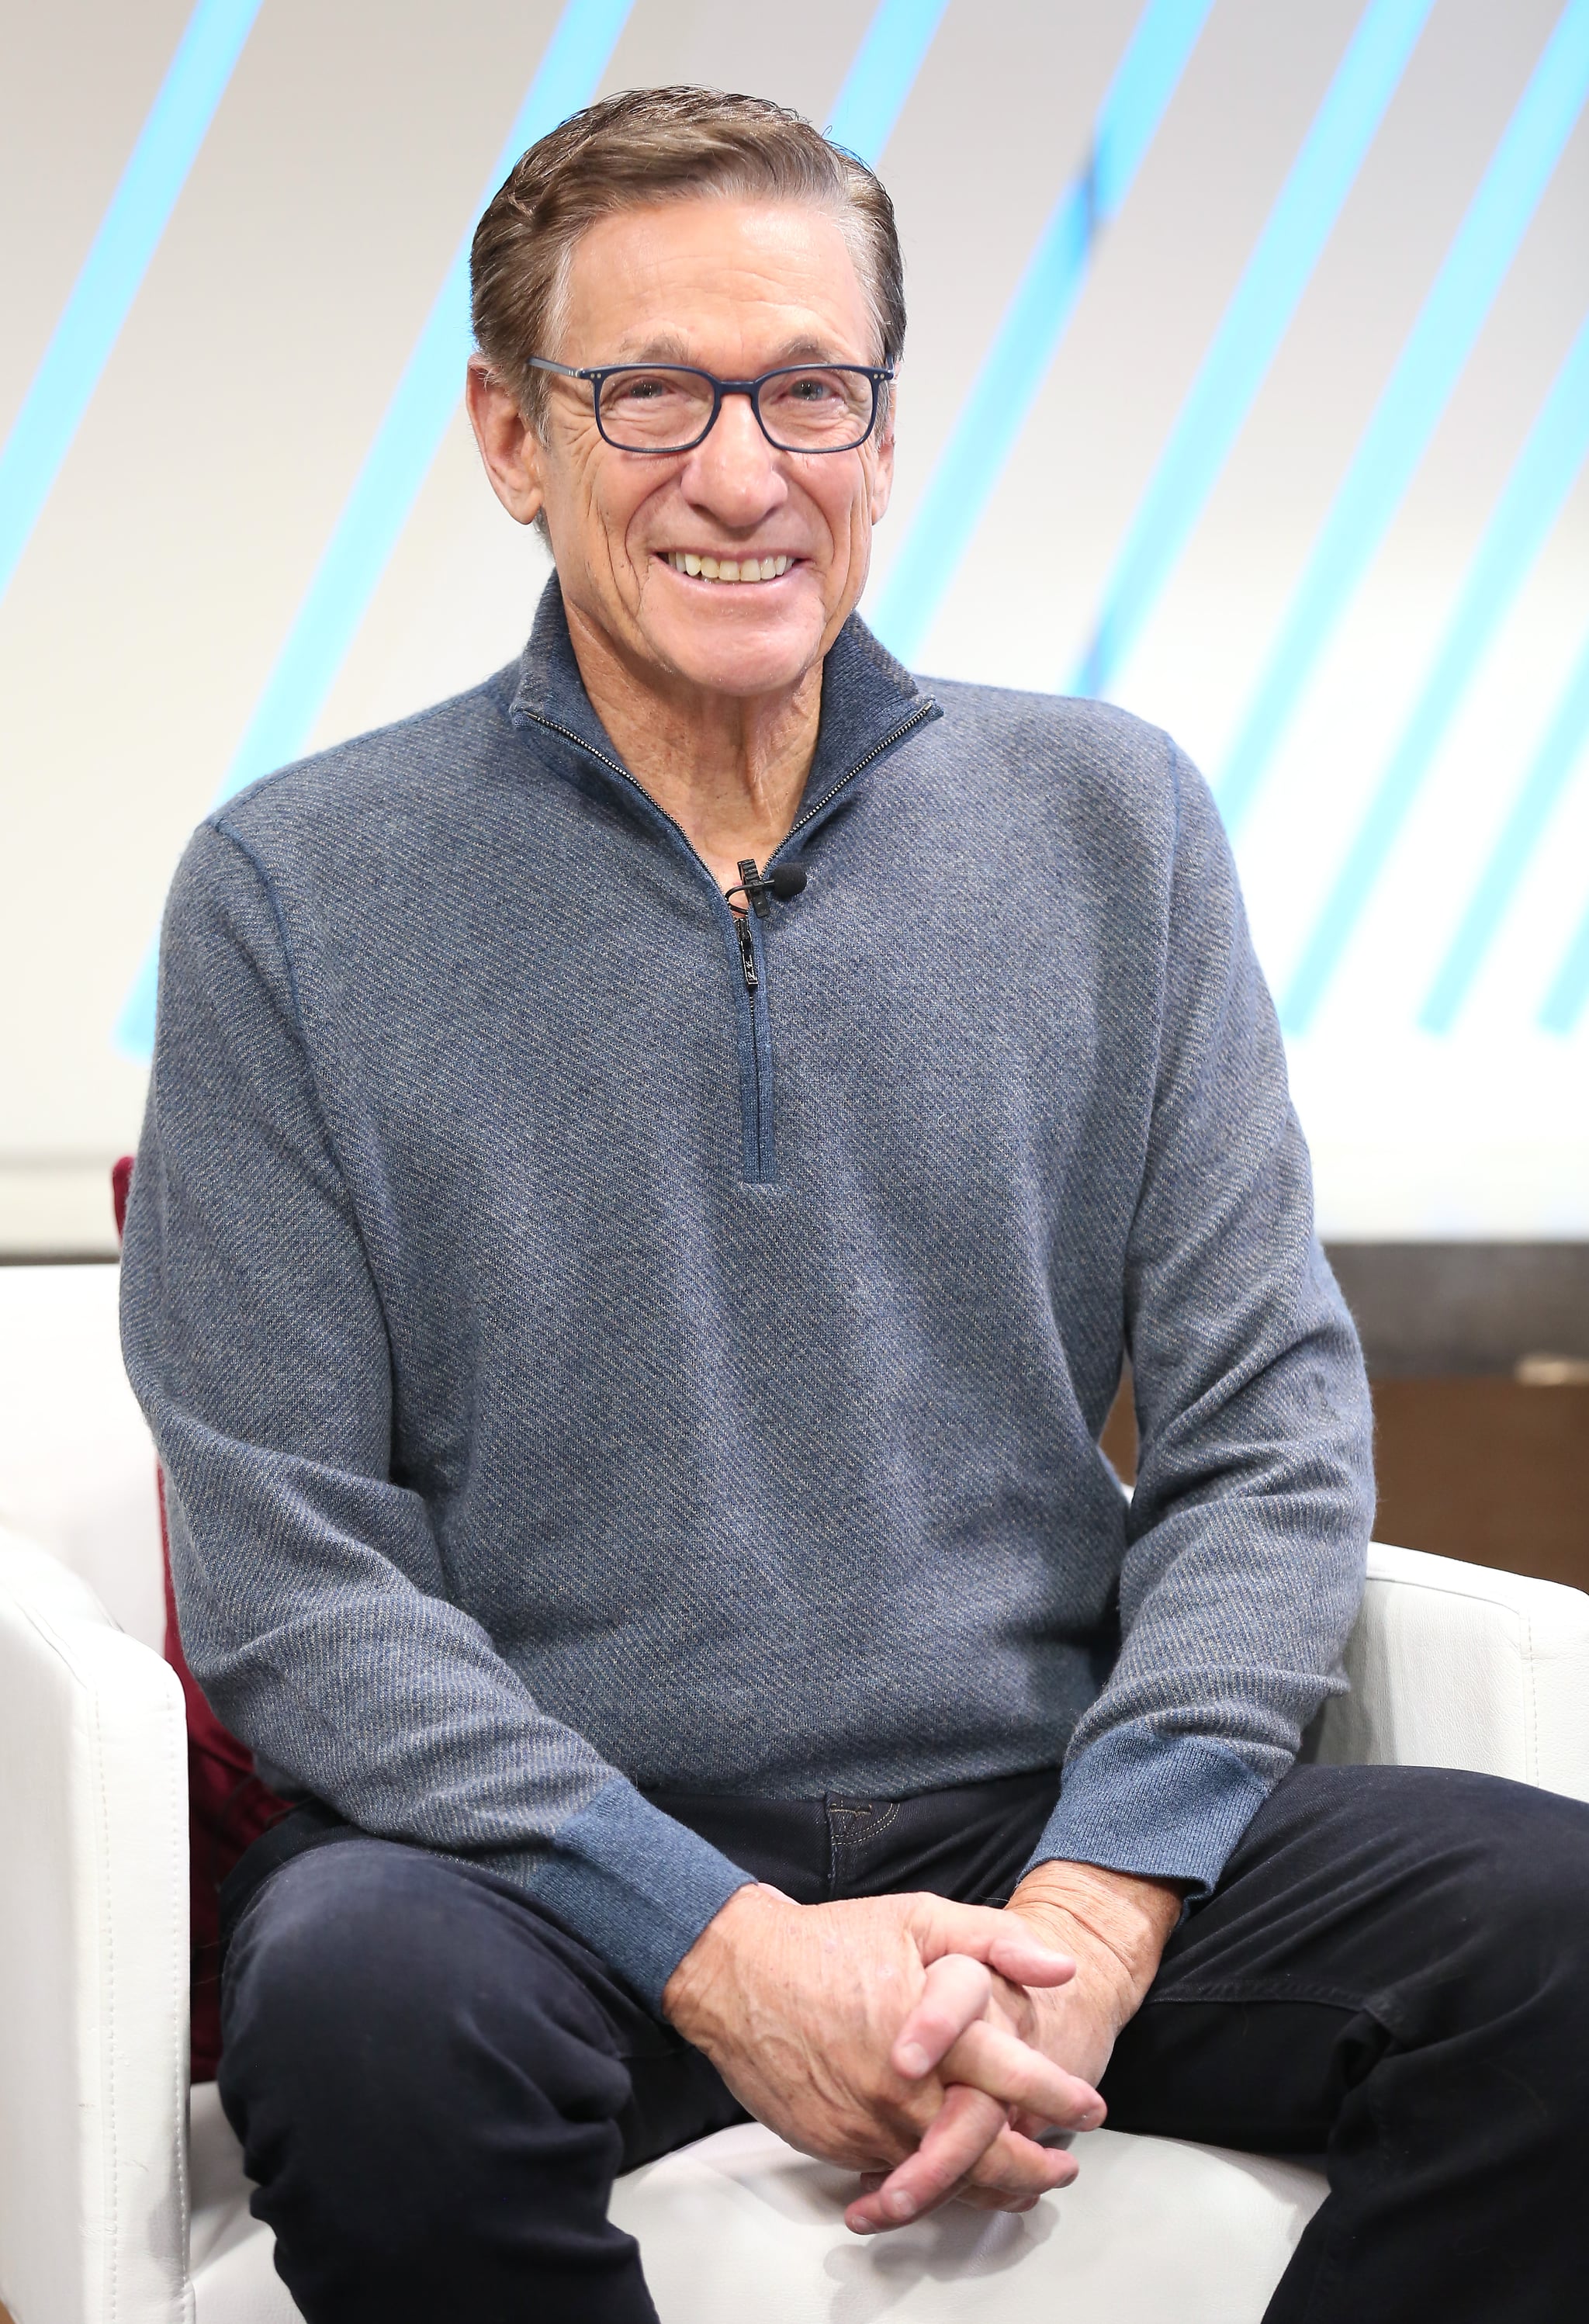 NEW YORK, NEW YORK - NOVEMBER 18: (EXCLUSIVE COVERAGE) Maury Povich visits People Now on November 18, 2019 in New York, United States. (Photo by Monica Schipper/Getty Images)